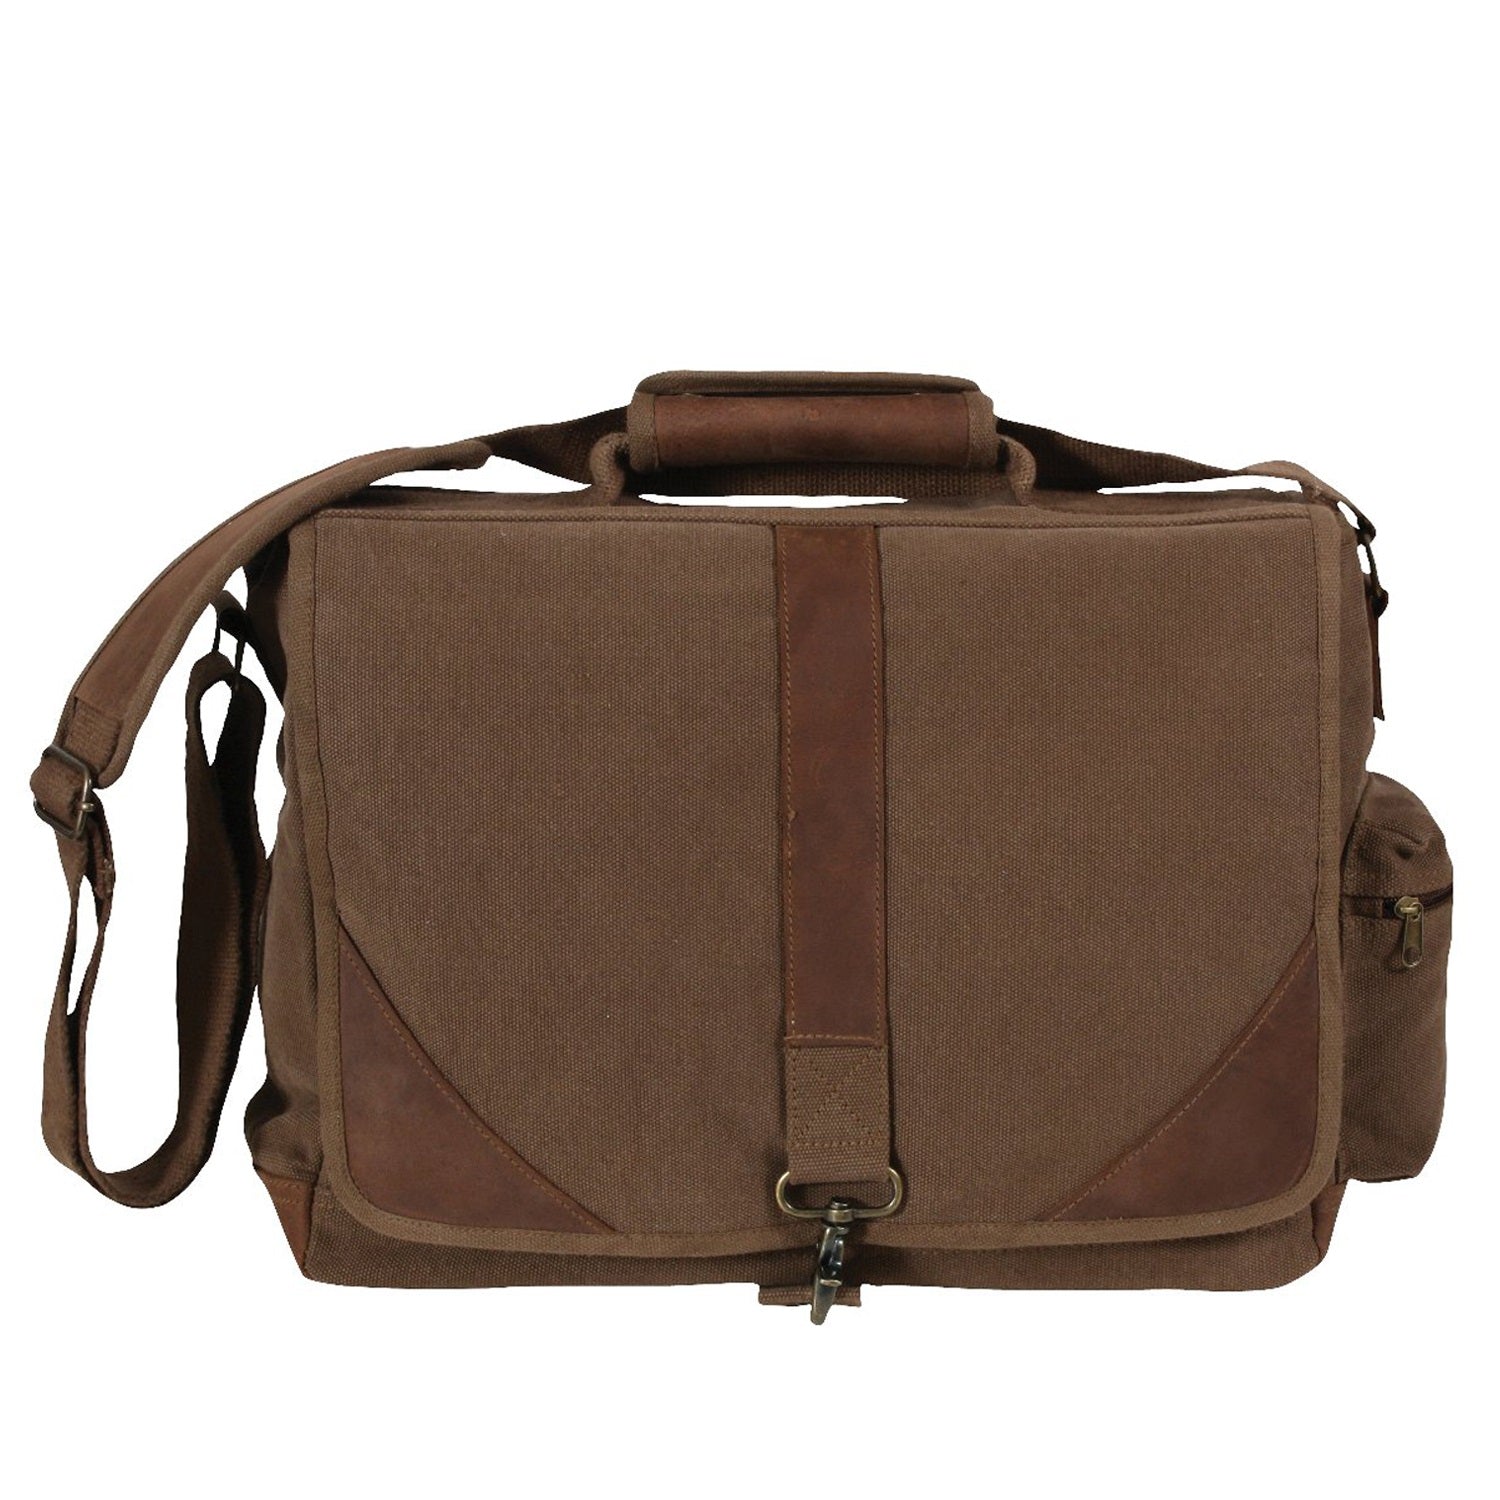 Rothco Vintage Canvas Urban Pioneer Laptop Bag with Leather Accents